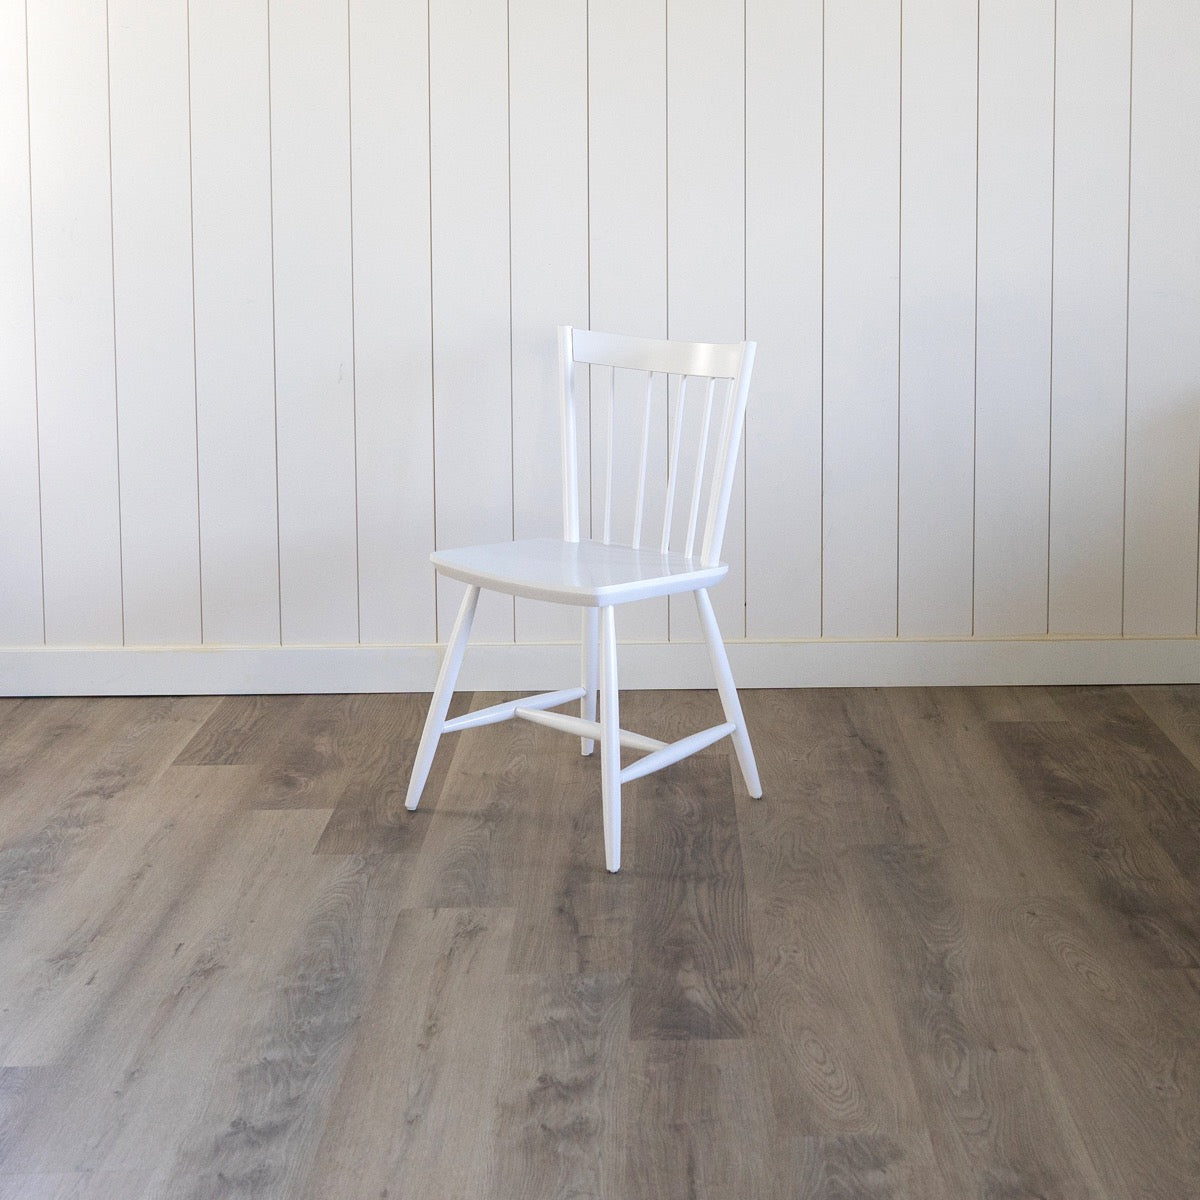 Hooper Dining Chair in Opaque White. Front view.